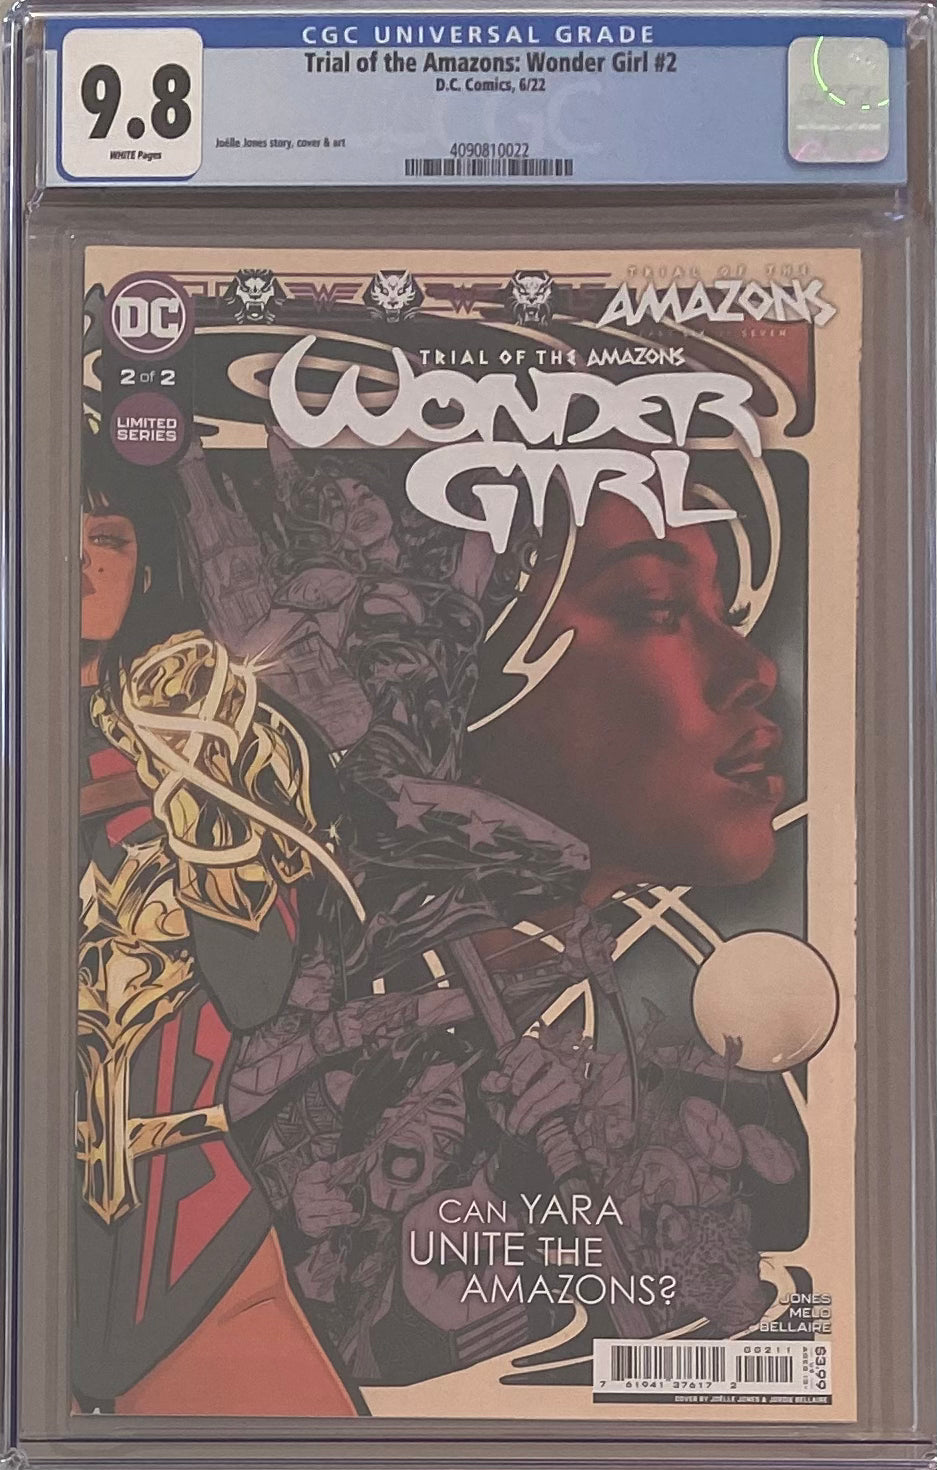 Trial of the Amazons: Wonder Girl #2 CGC 9.8